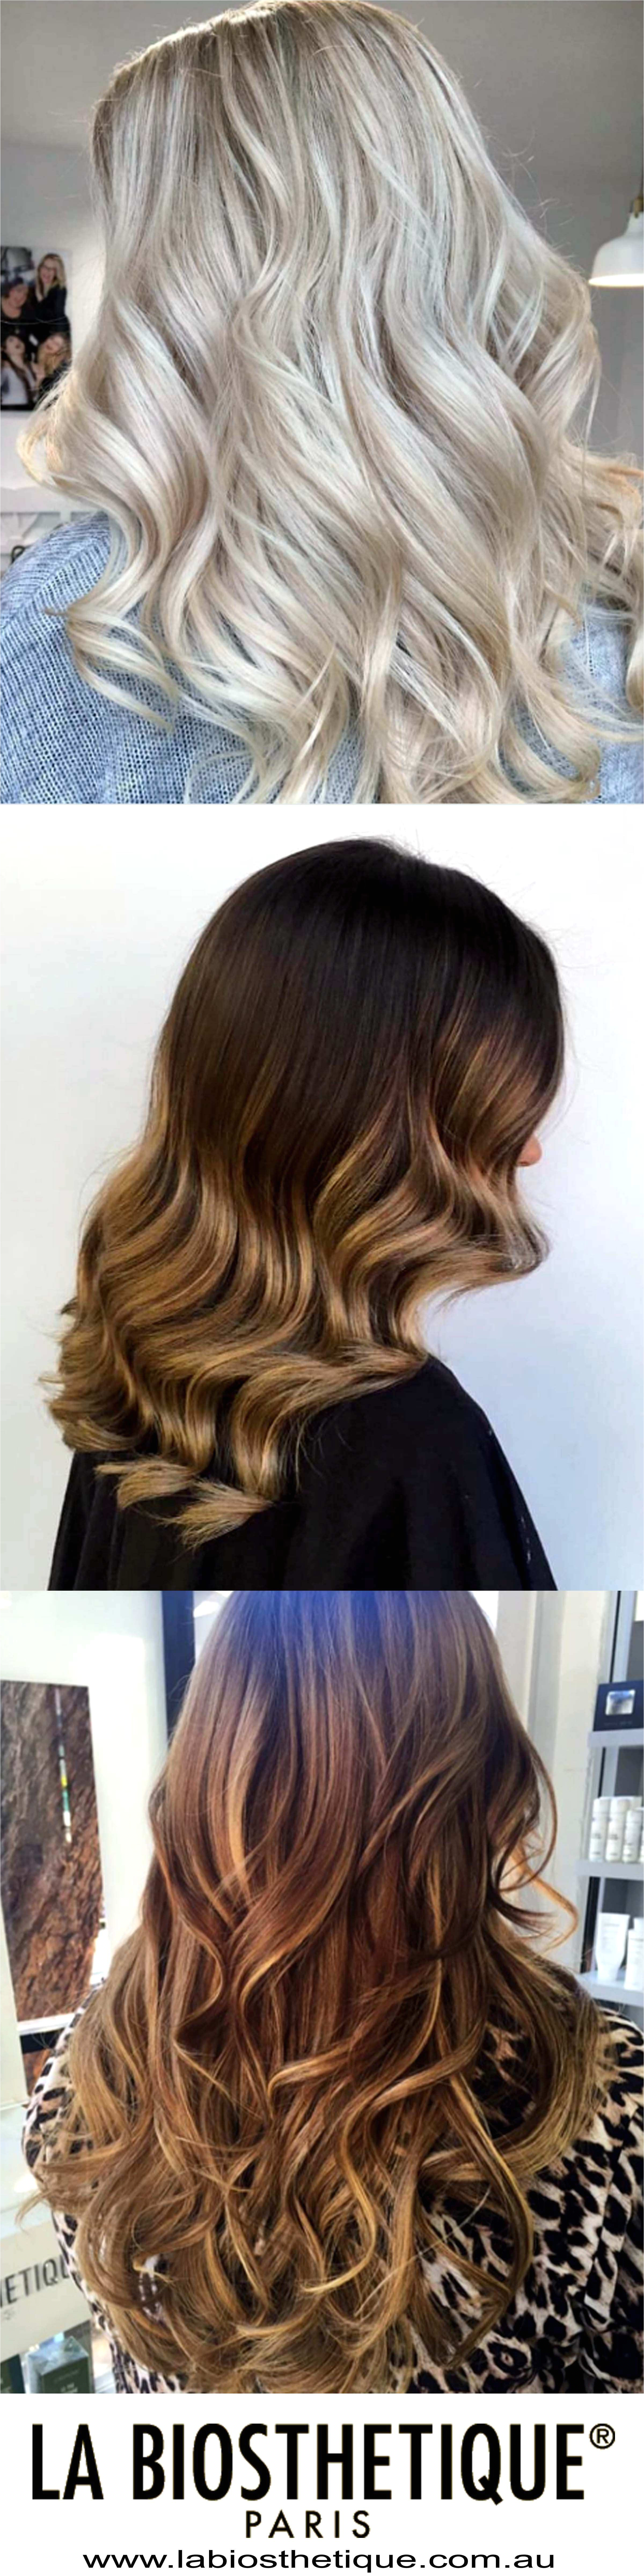 Girls Hairstyles for Party Beautiful Waves Hairstyles Hair Styles ¢”‚short Hairstyles ¢”